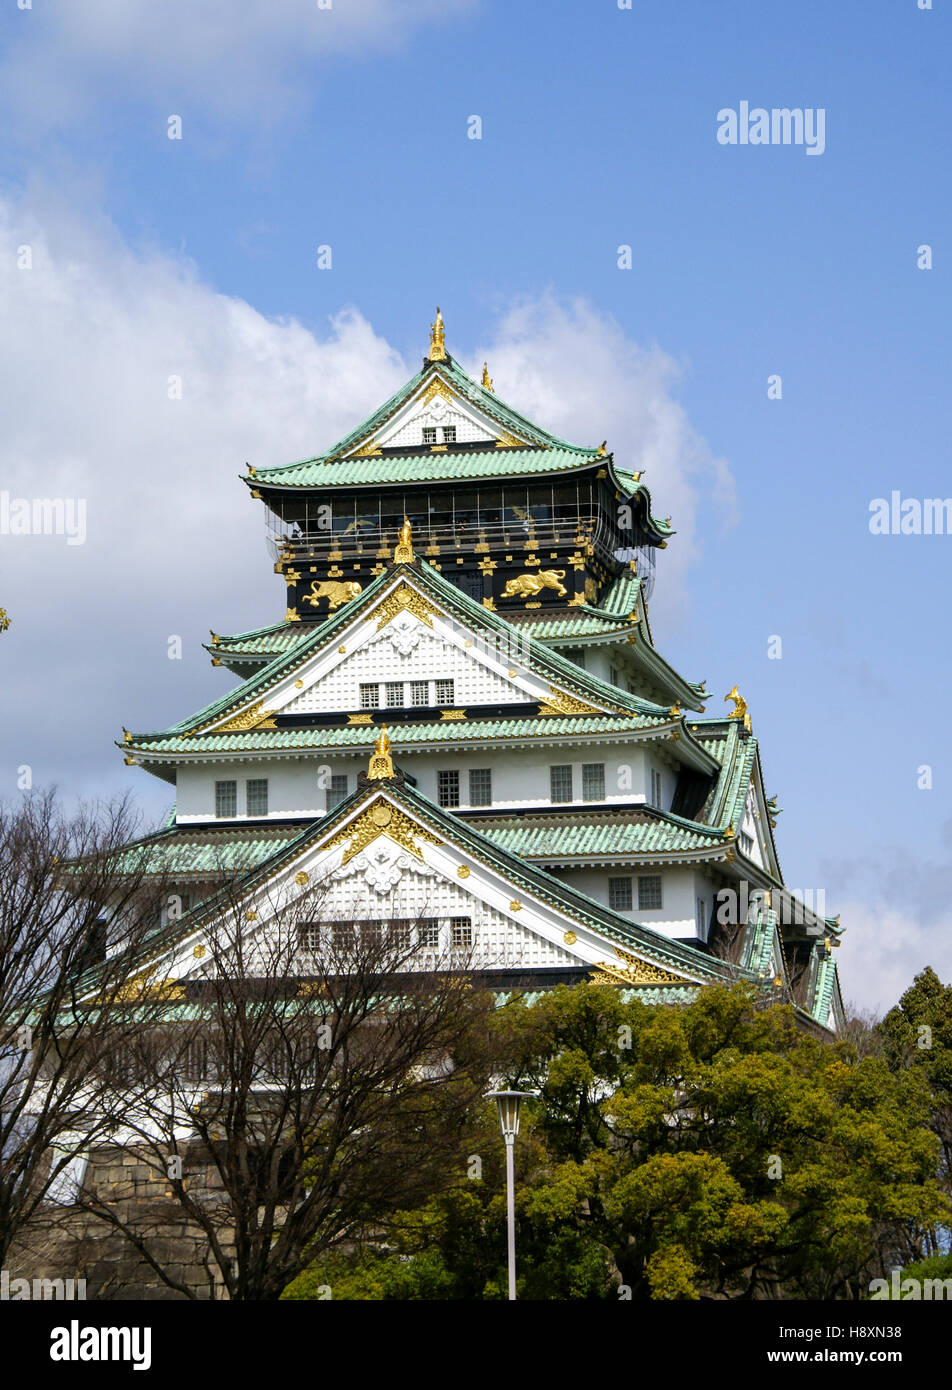 Osaka Castle is a Japanese castle in Chūō-ku, Osaka, Japan. It was built in the sixteenth century and is surrounded by a moat. Stock Photo